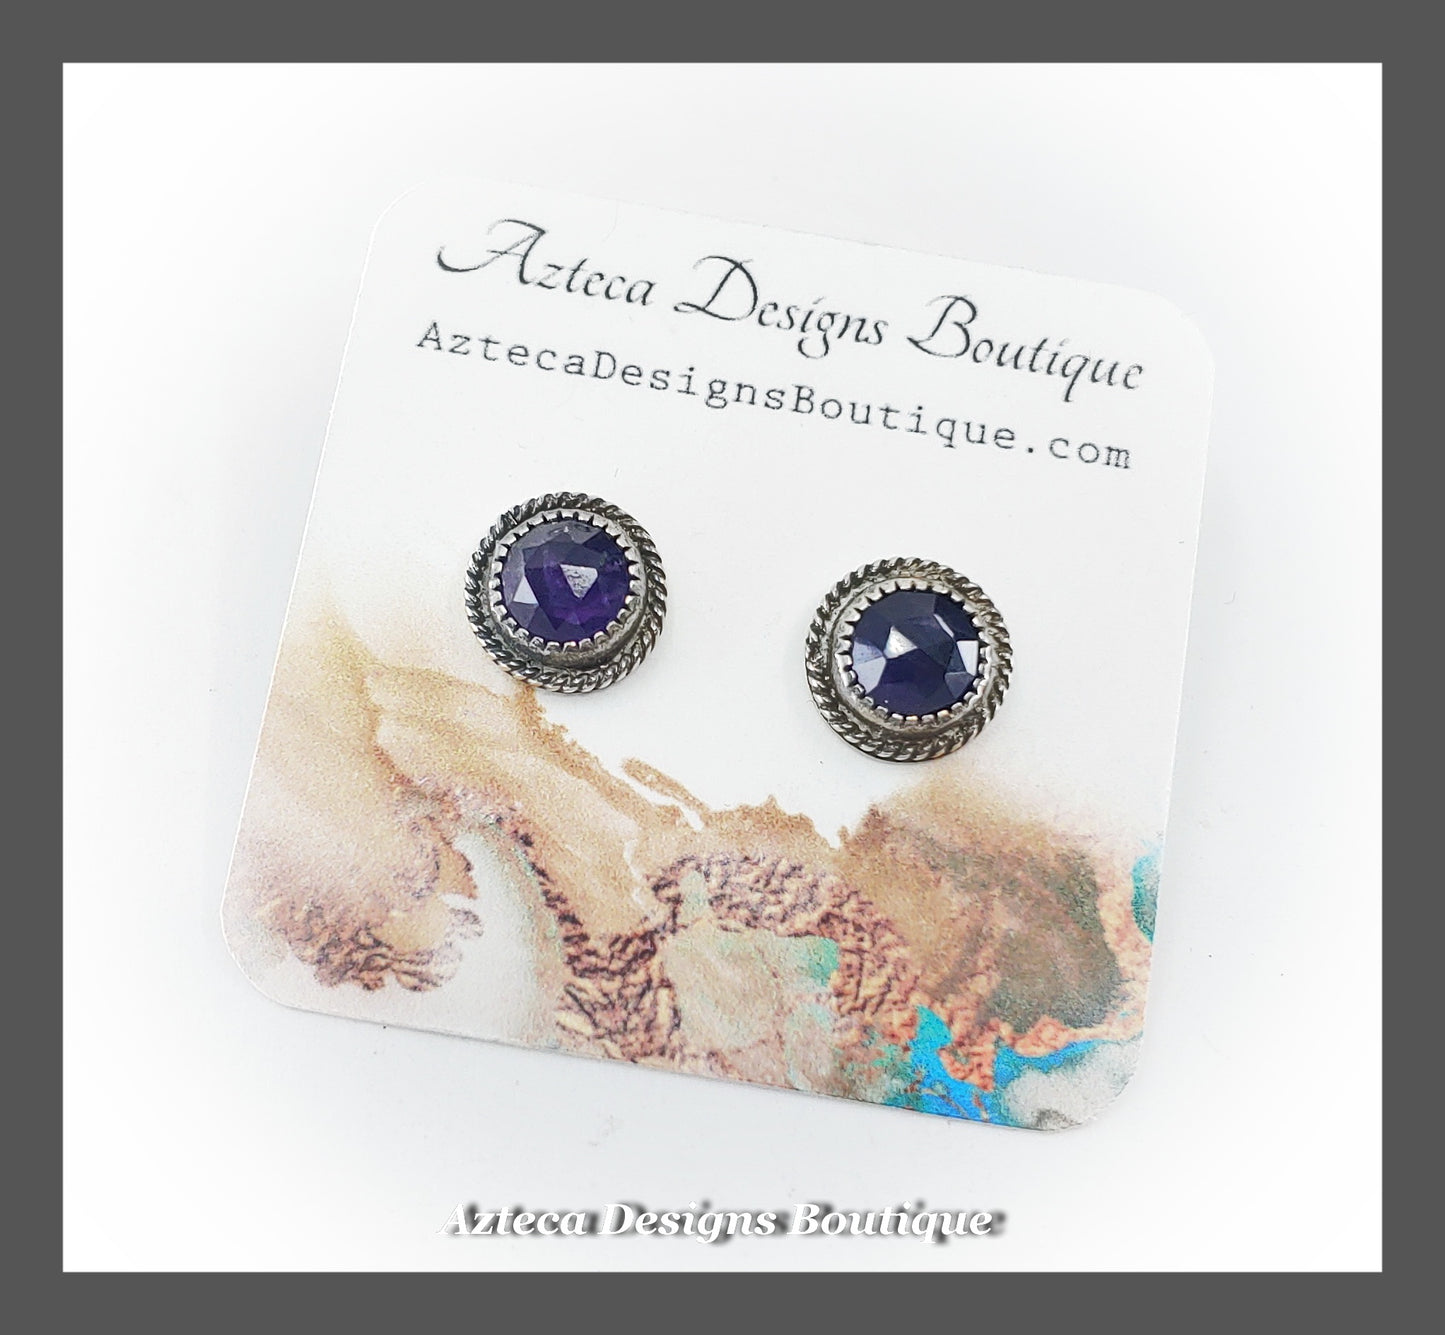 Amethyst + Hand Fabricated Sterling Silver Post Earrings